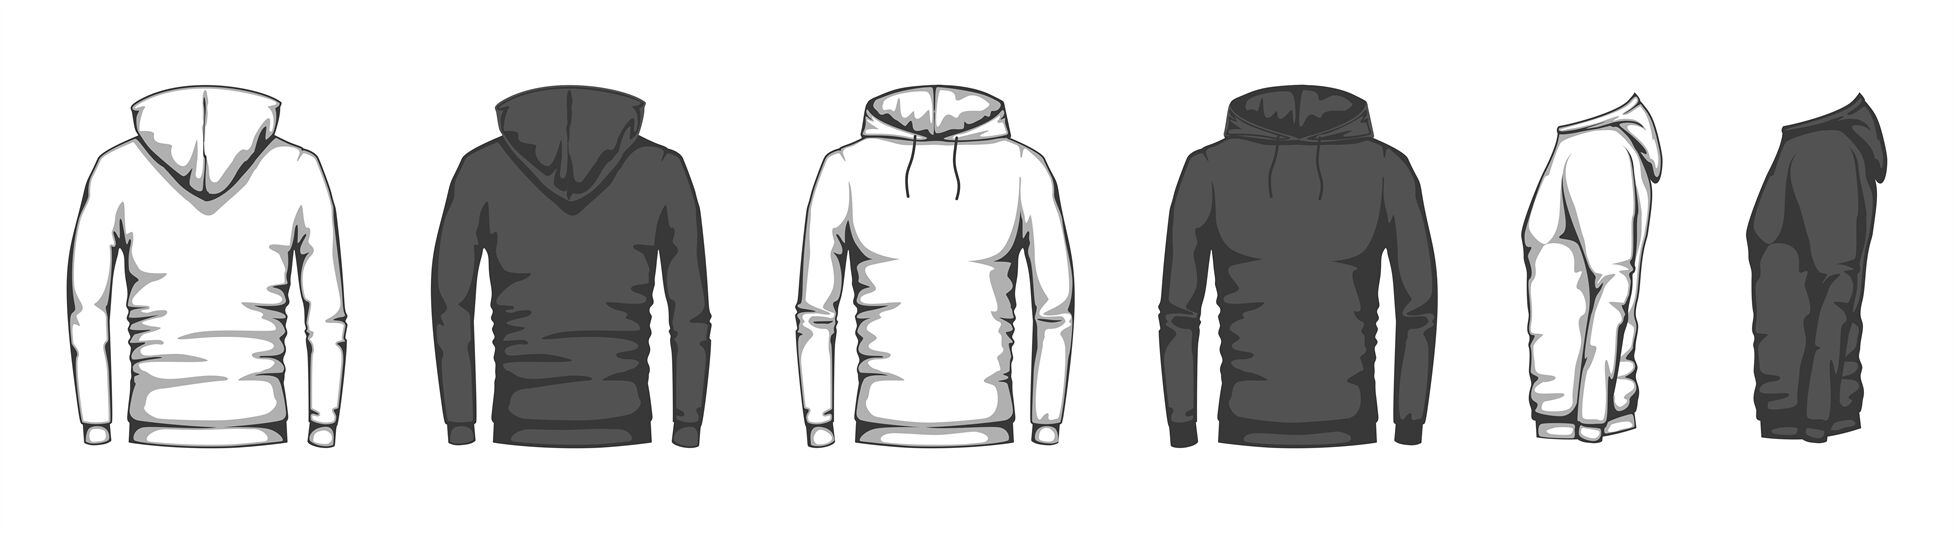 Download Hoodie mockup. Trendy casual clothes unisex sport ...